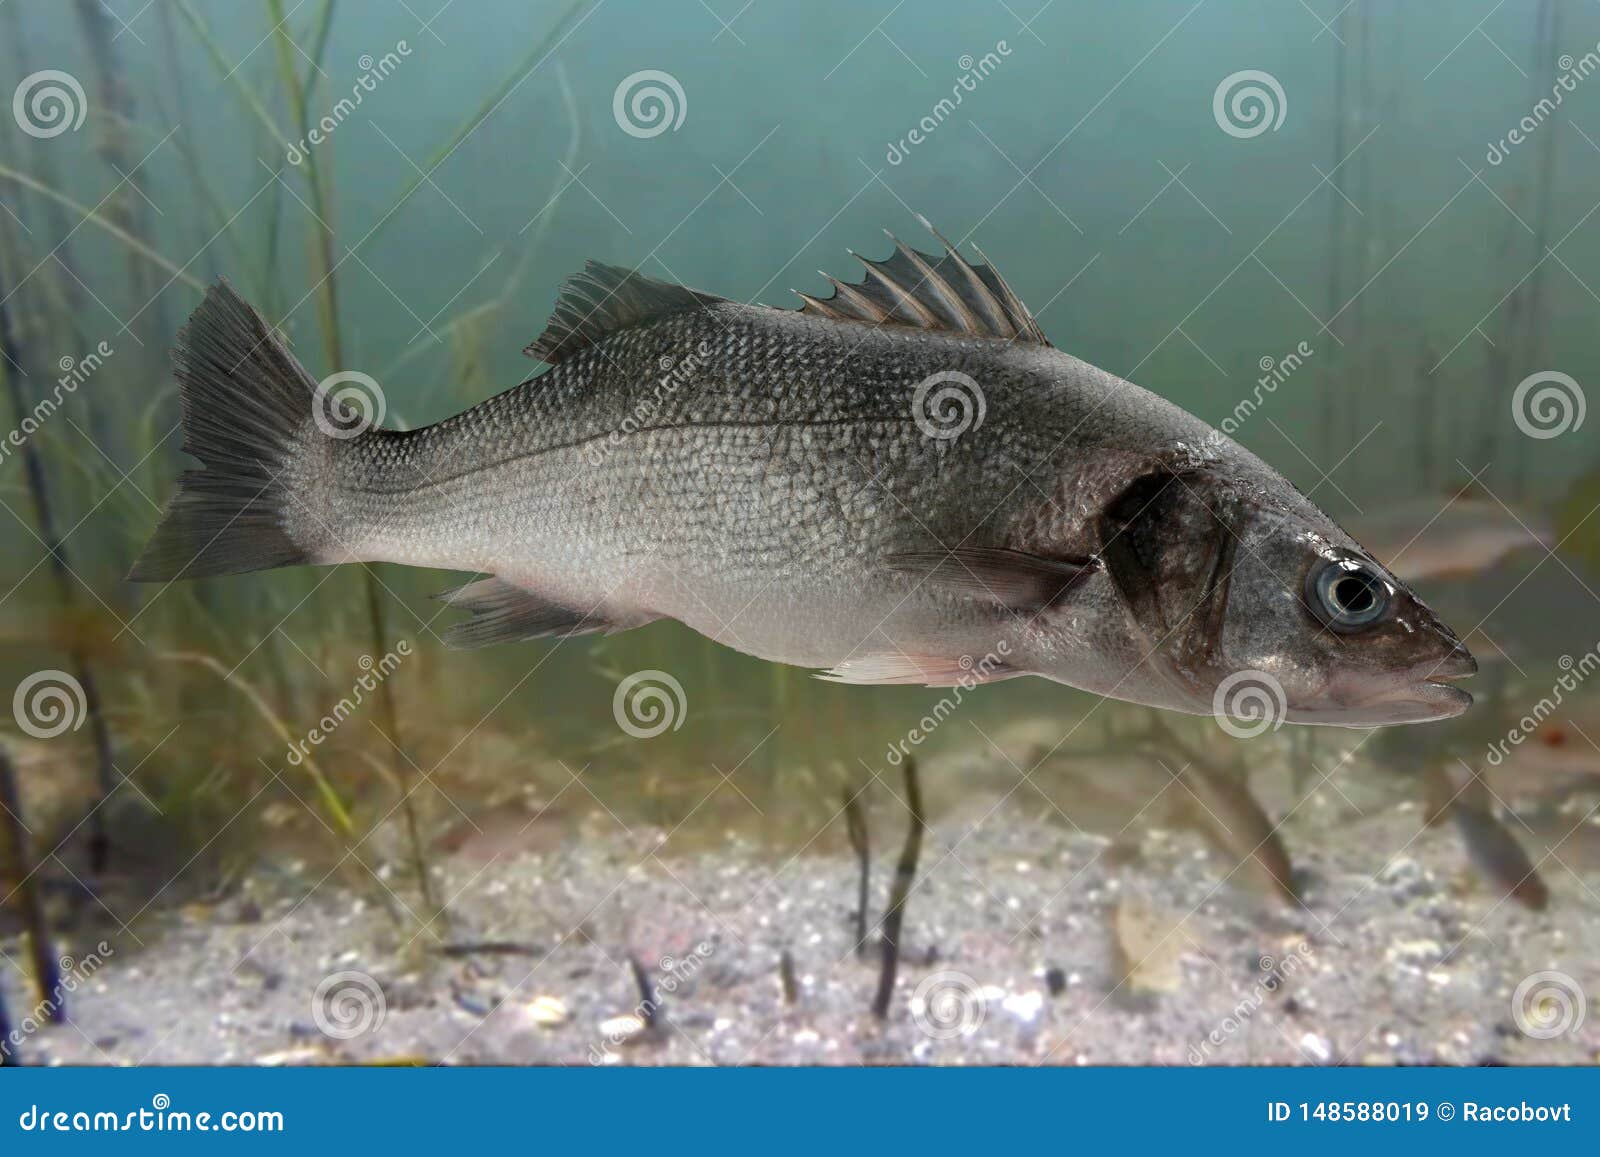 Live sea bass fish stock image. Image of wolf, ocean - 148588019